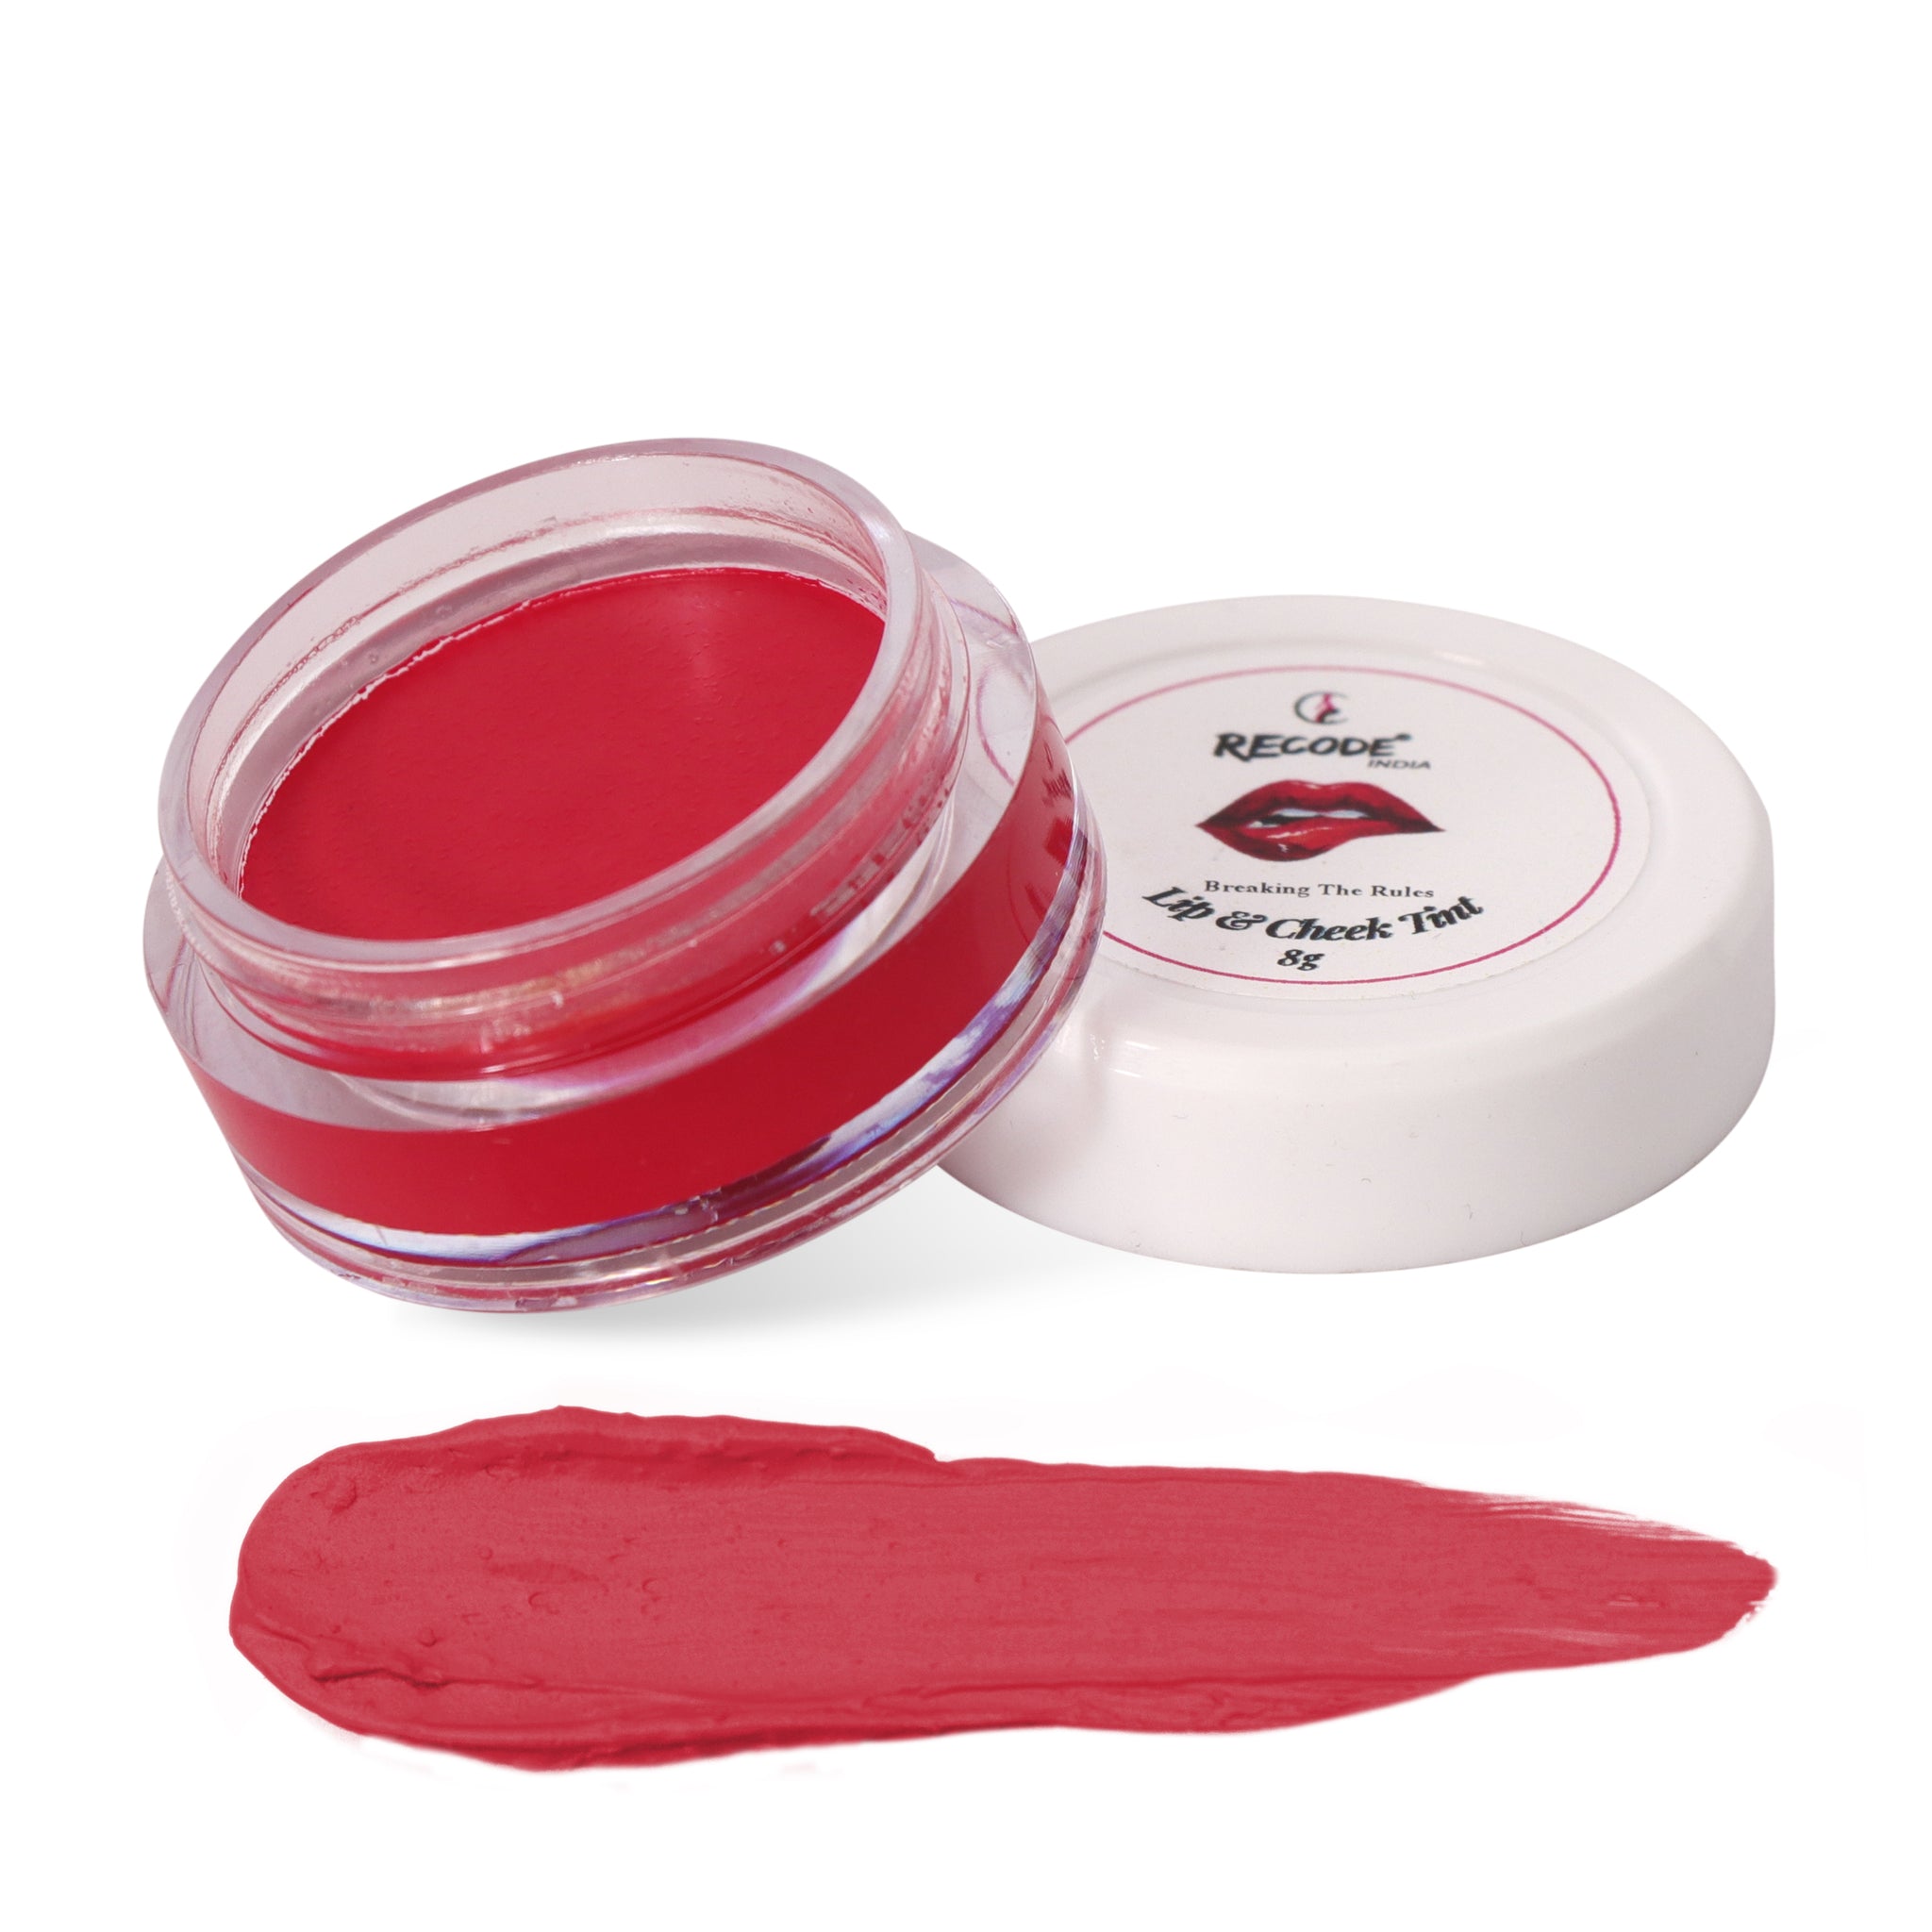 Recode Lip & Cheek Tint - Breaking The Rules - 8 gms